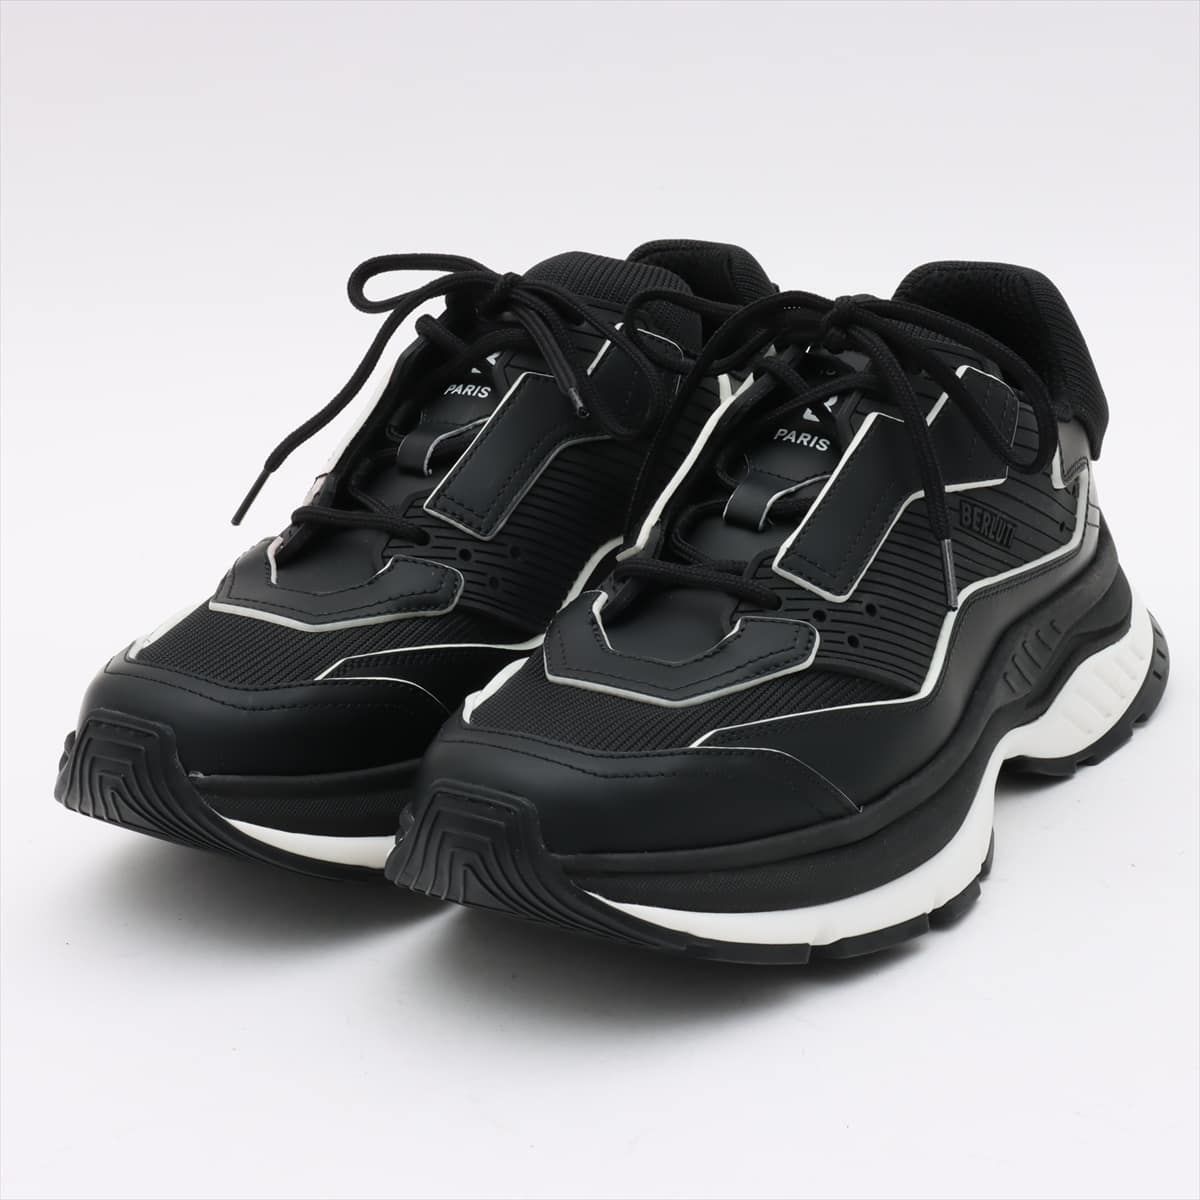 Berluti Leather × Rubber Sneakers 7 Men's Black gravity Is there a replacement string